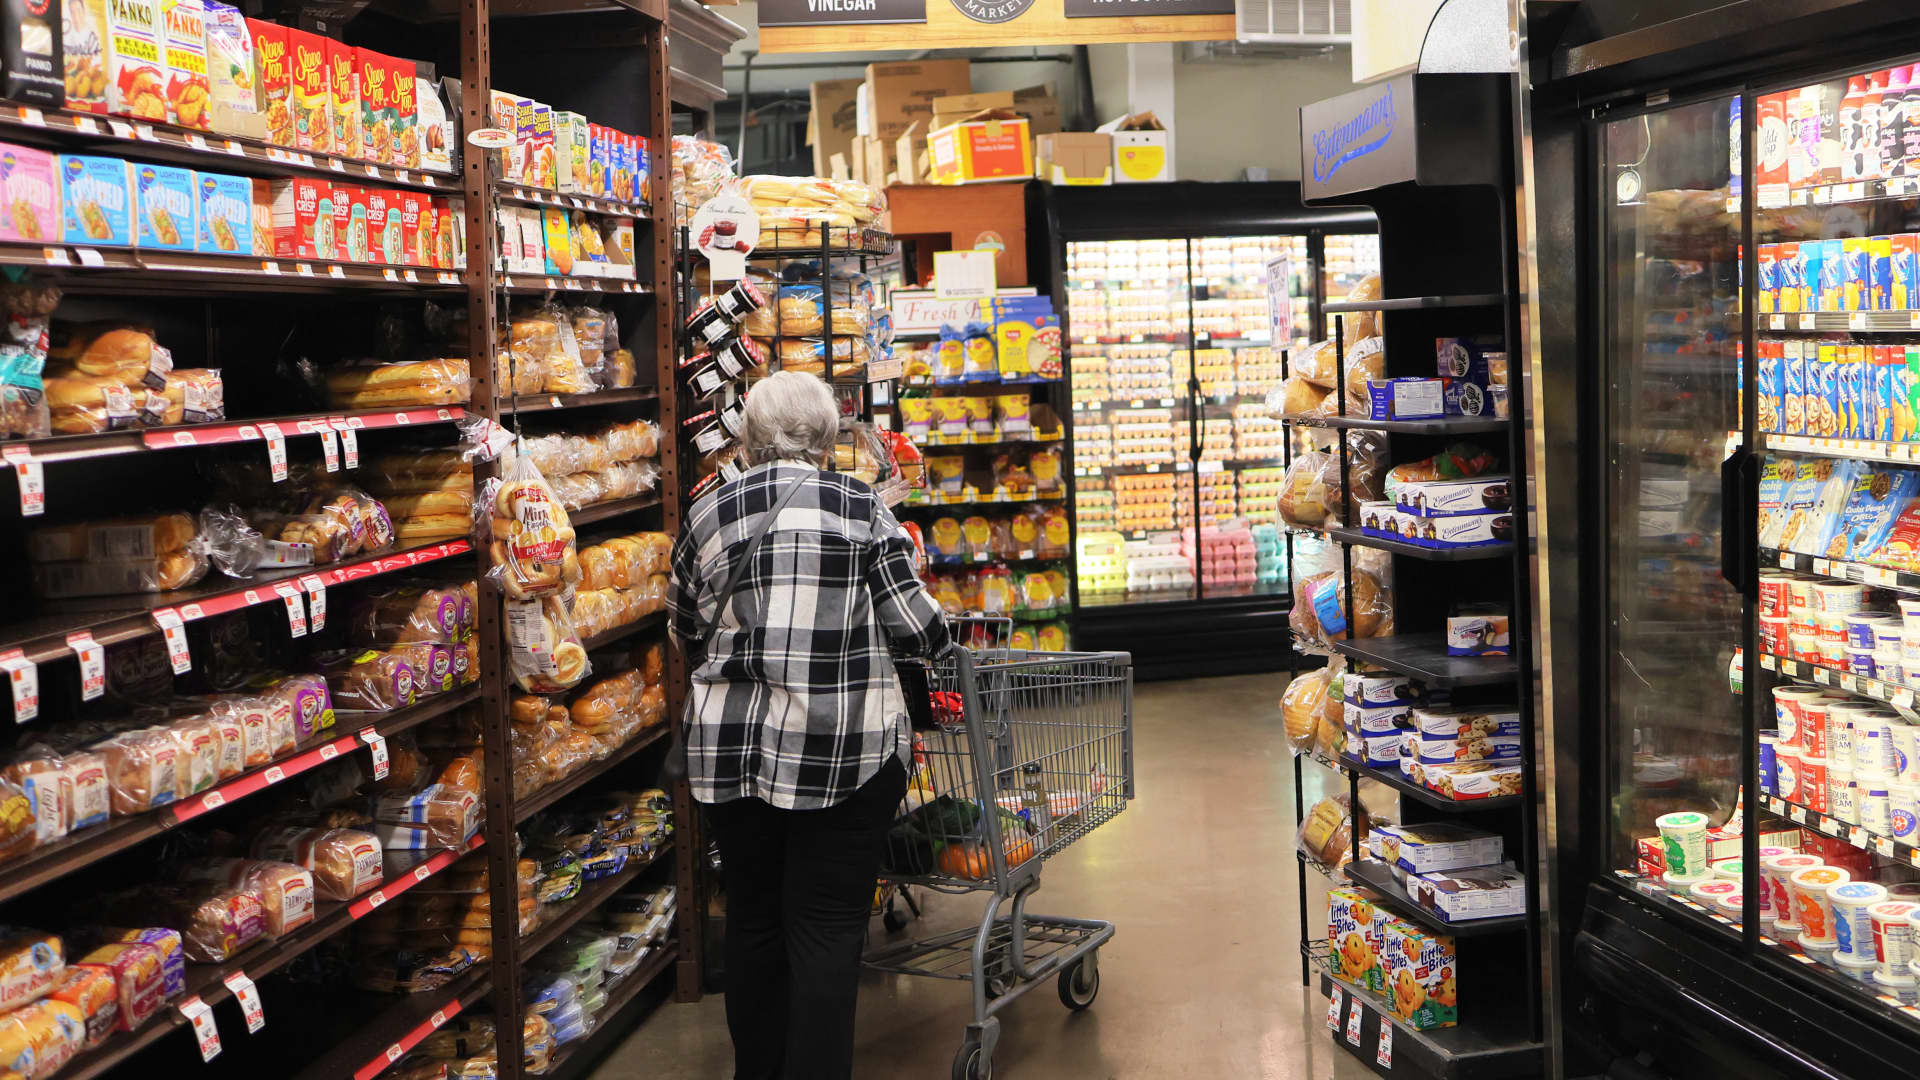 Consumer prices rose 0.3%, more than expected; annual rate at 3.1%